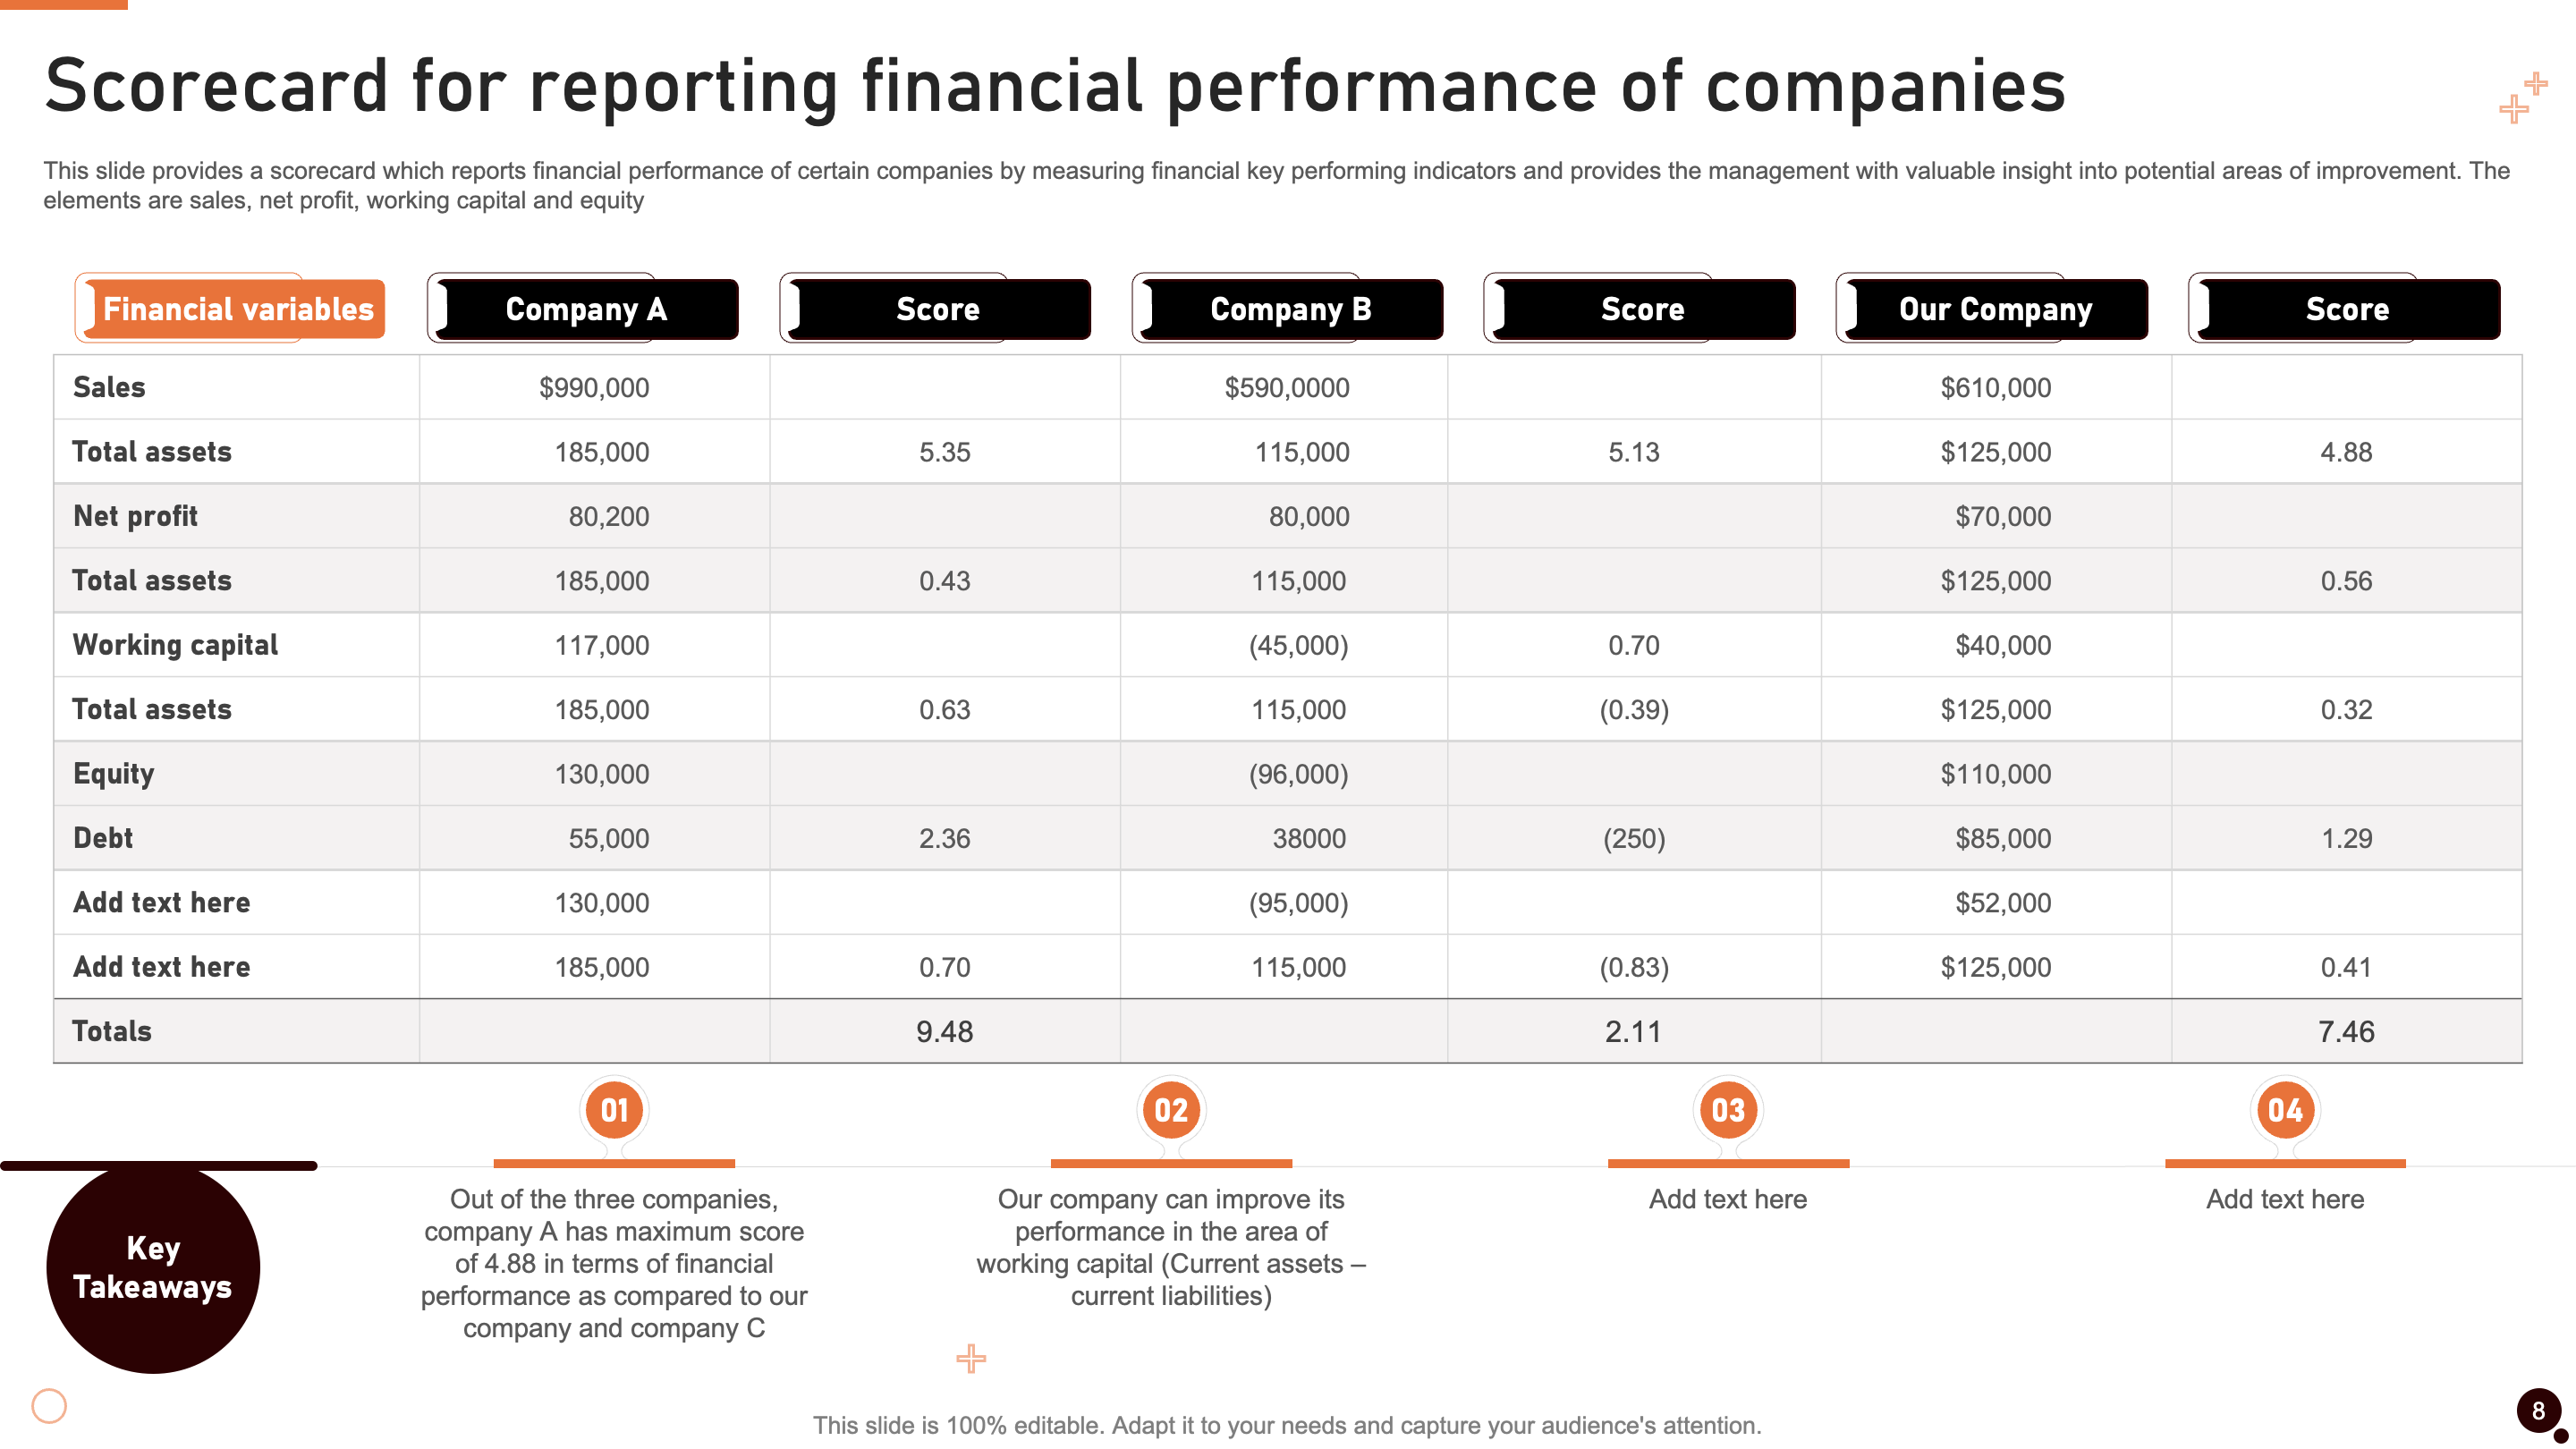 Scorecard for Reporting Financial Performance of Companies